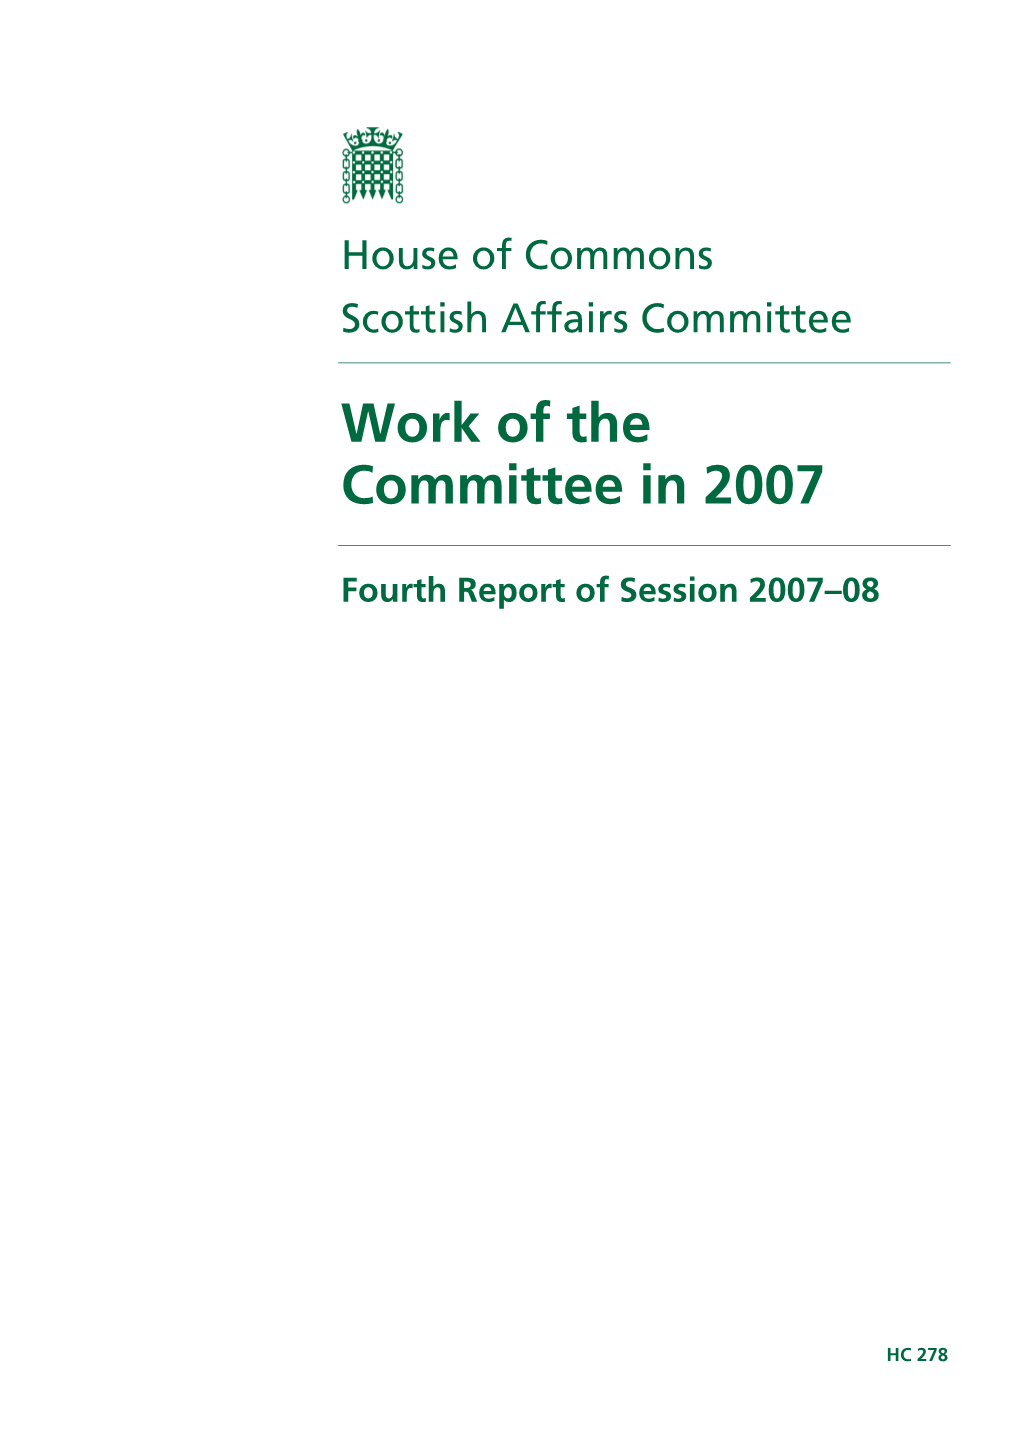 Work of the Committee in 2007